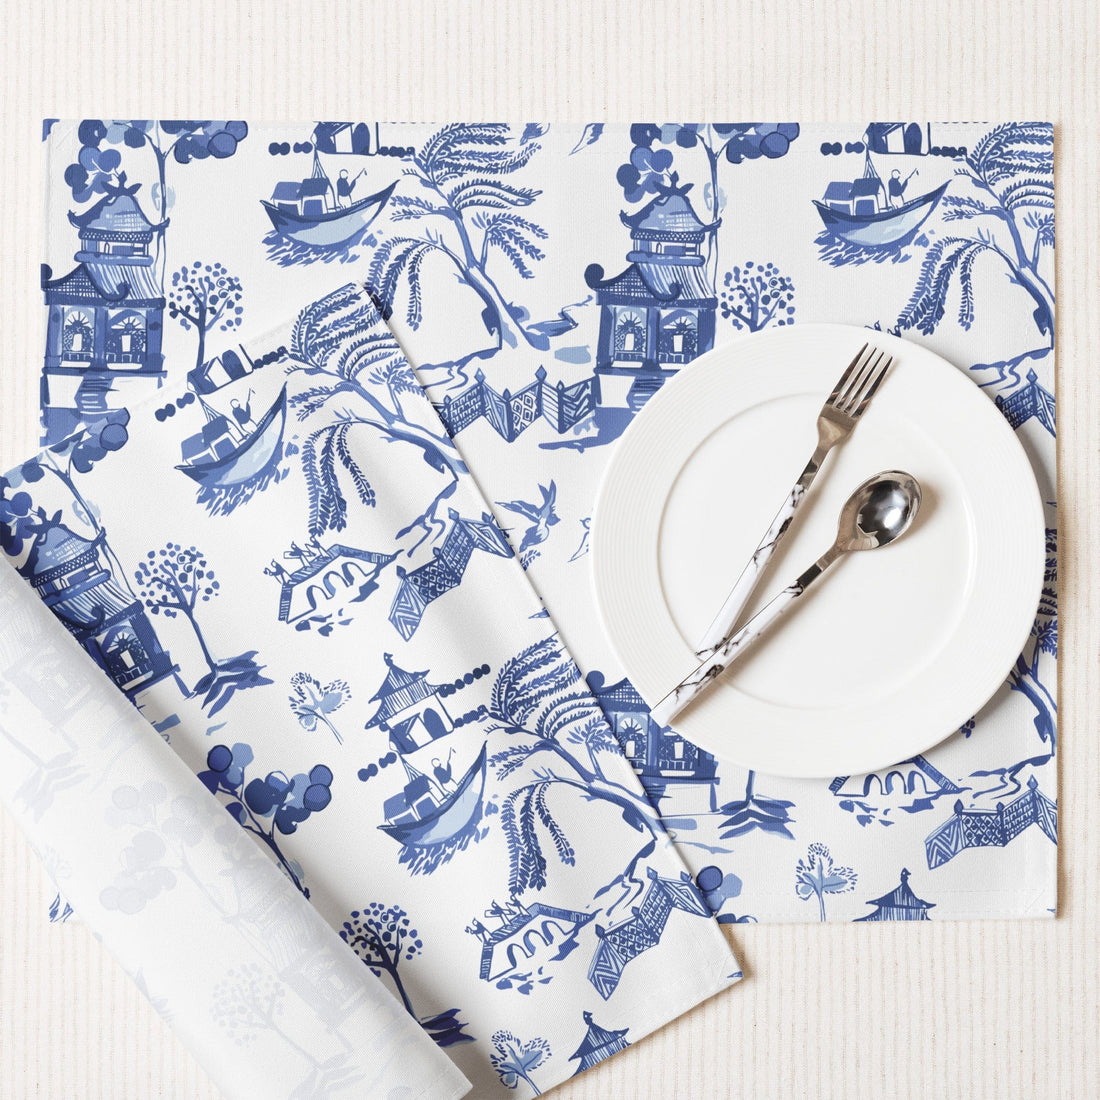 Kate McEnroe New York Blue Willow Chinoiserie Placemats, Set of 4, Classic Blue and White Table Mats, Oriental Dining DecorPlacemats9106838_17484